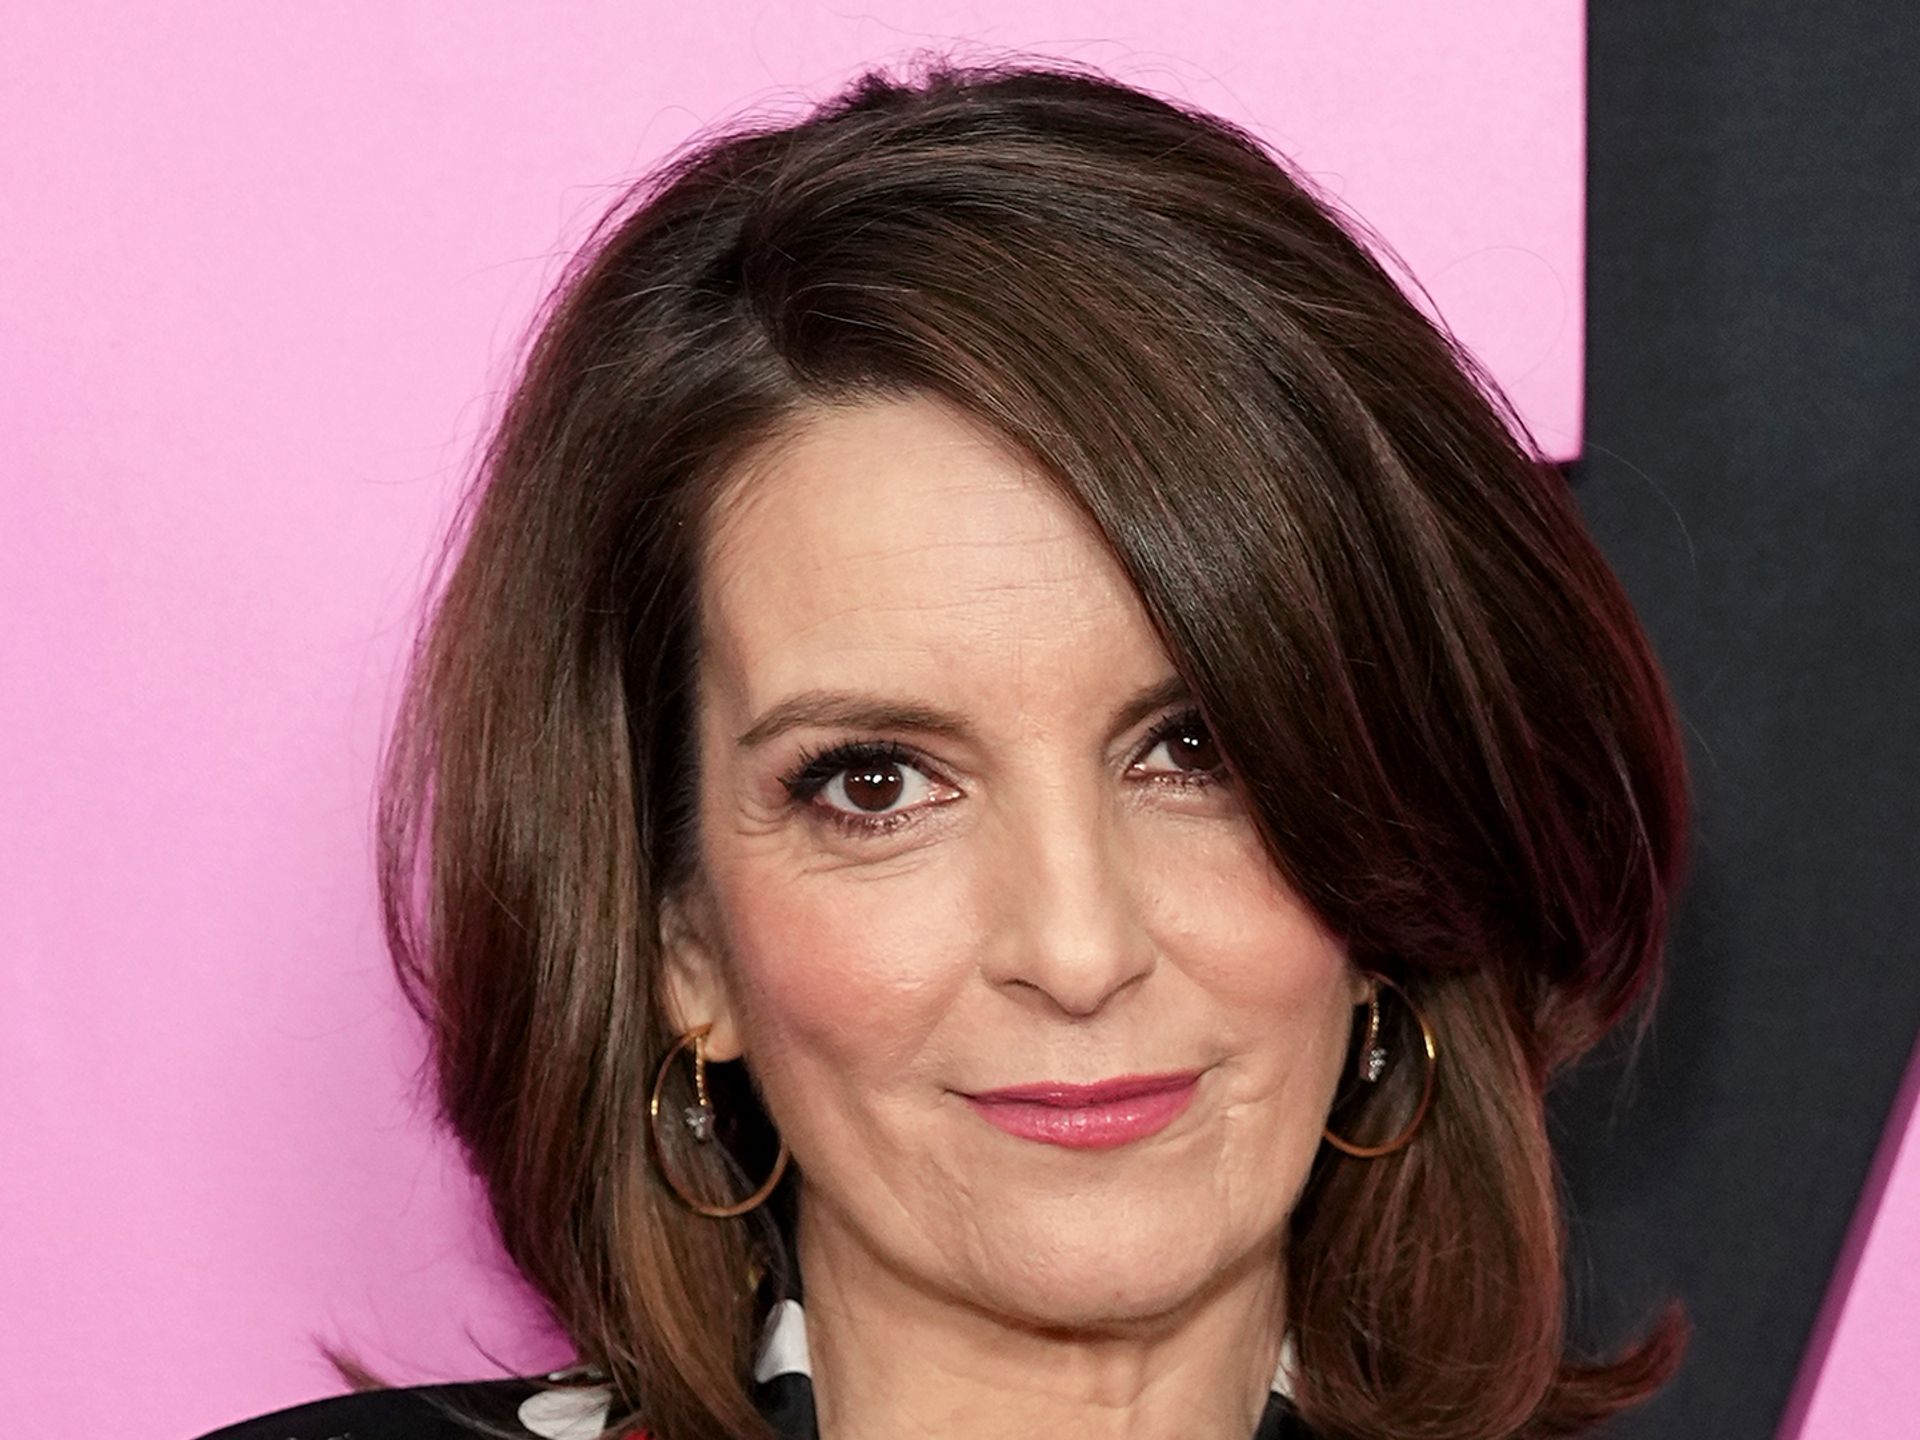 Tina Fey is turning 'Mean Girls' Broadway musical back into movie